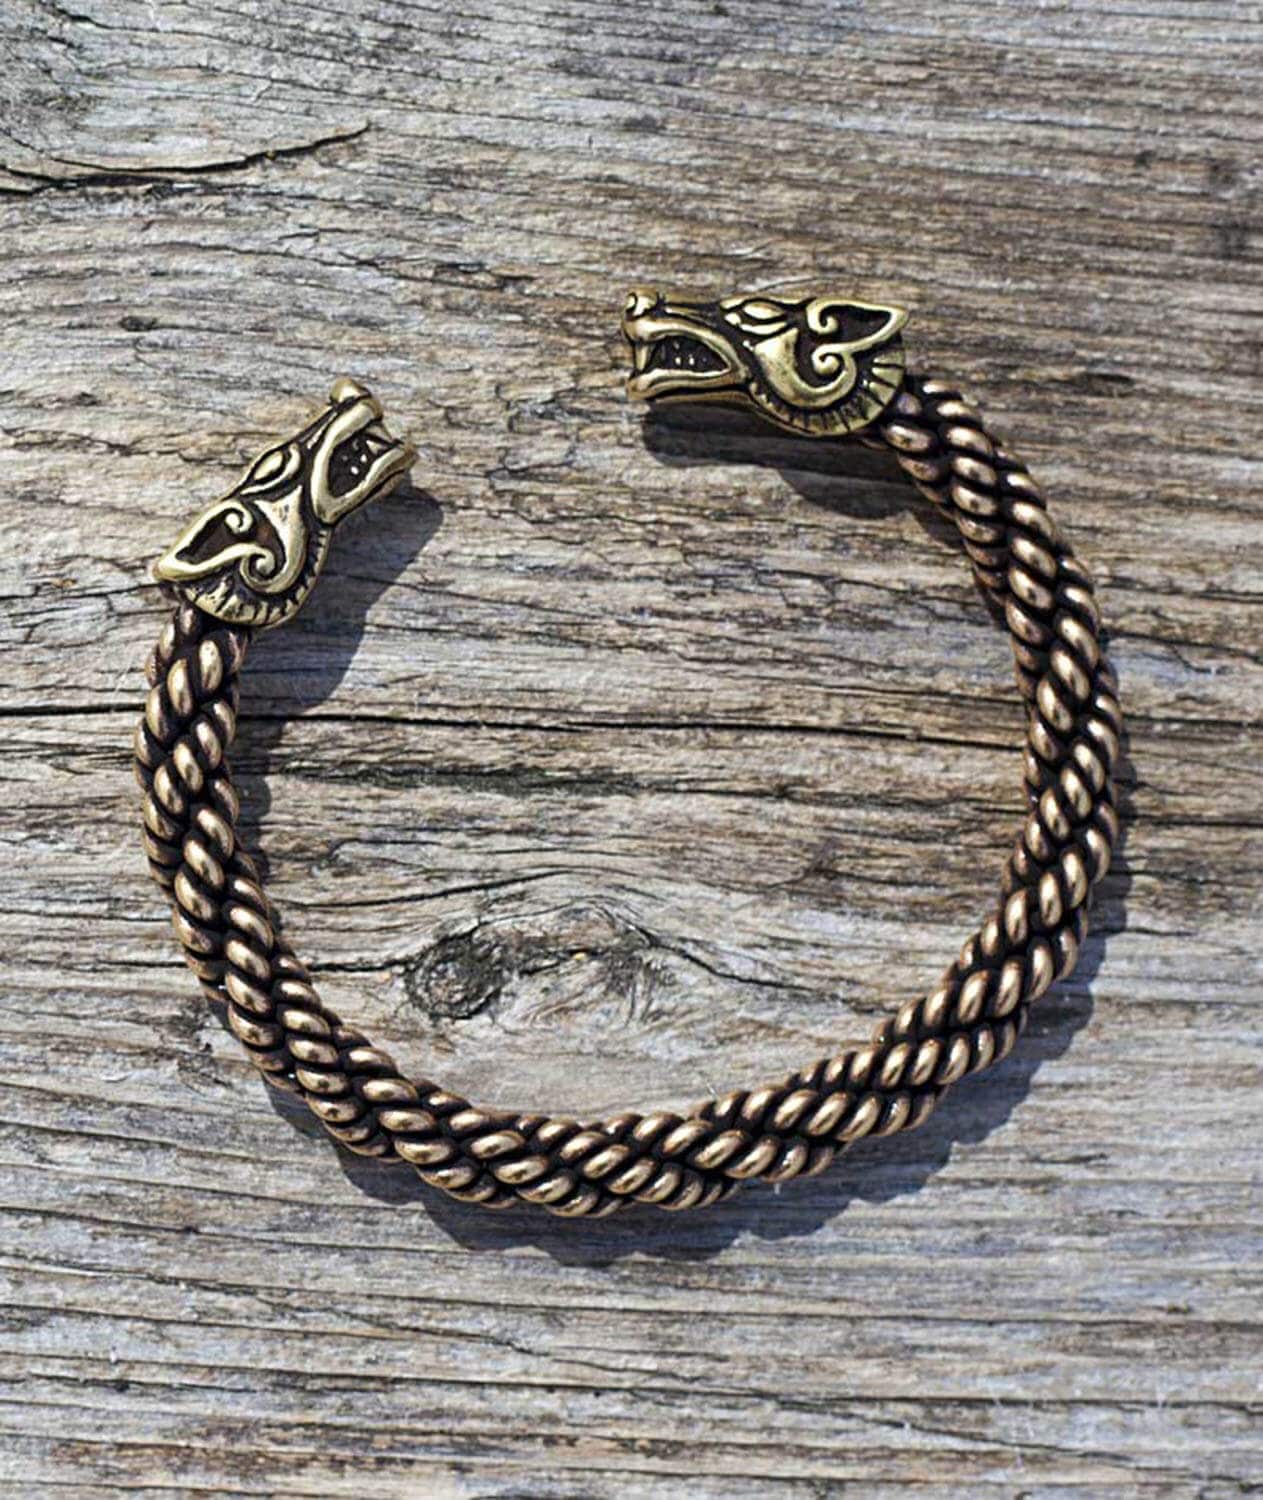 Why Did the Celts Wear Torcs?